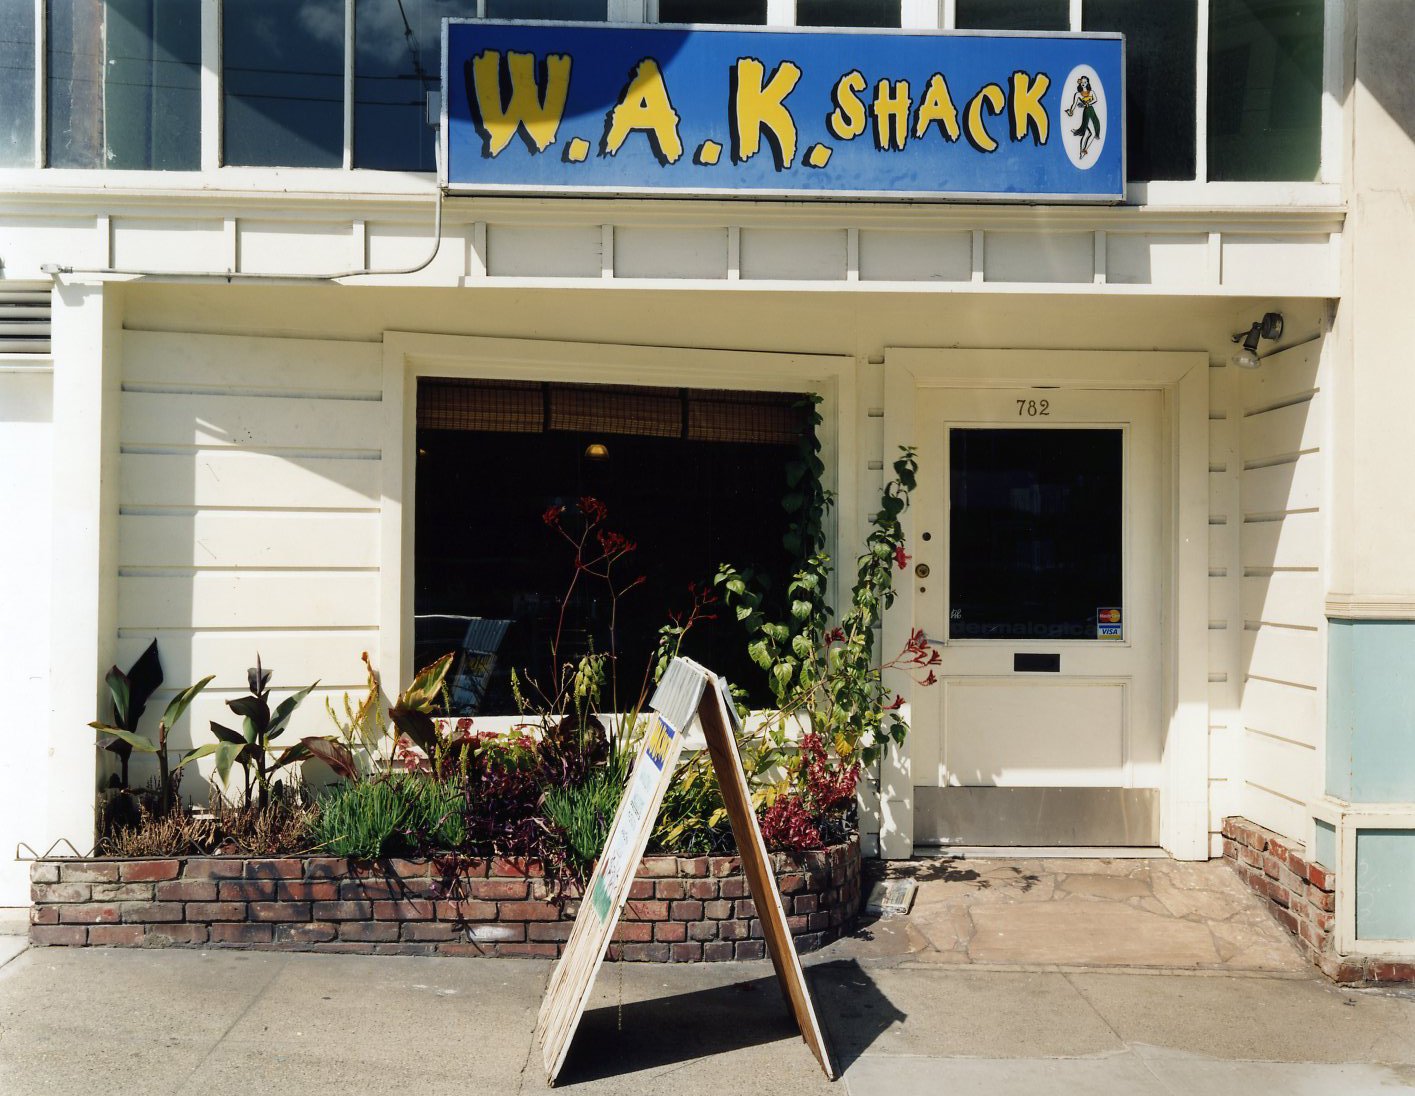  W.A.K. Shack (formerly Whoo Cares), San Francisco, California, 2007 